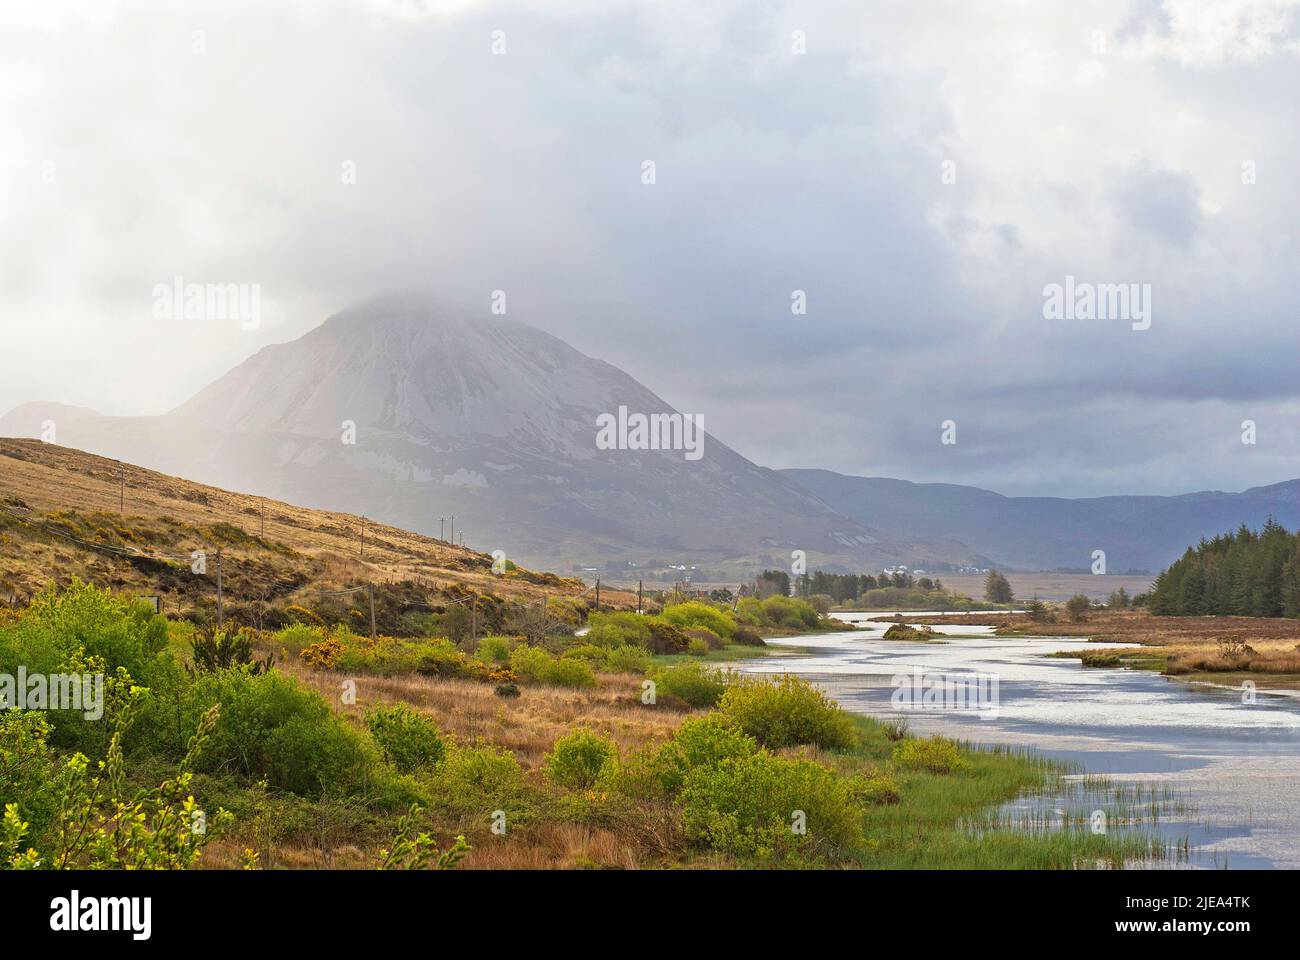 Clady river and Mount Errigal semi covered by clouds, County Donegal, Ireland Stock Photo